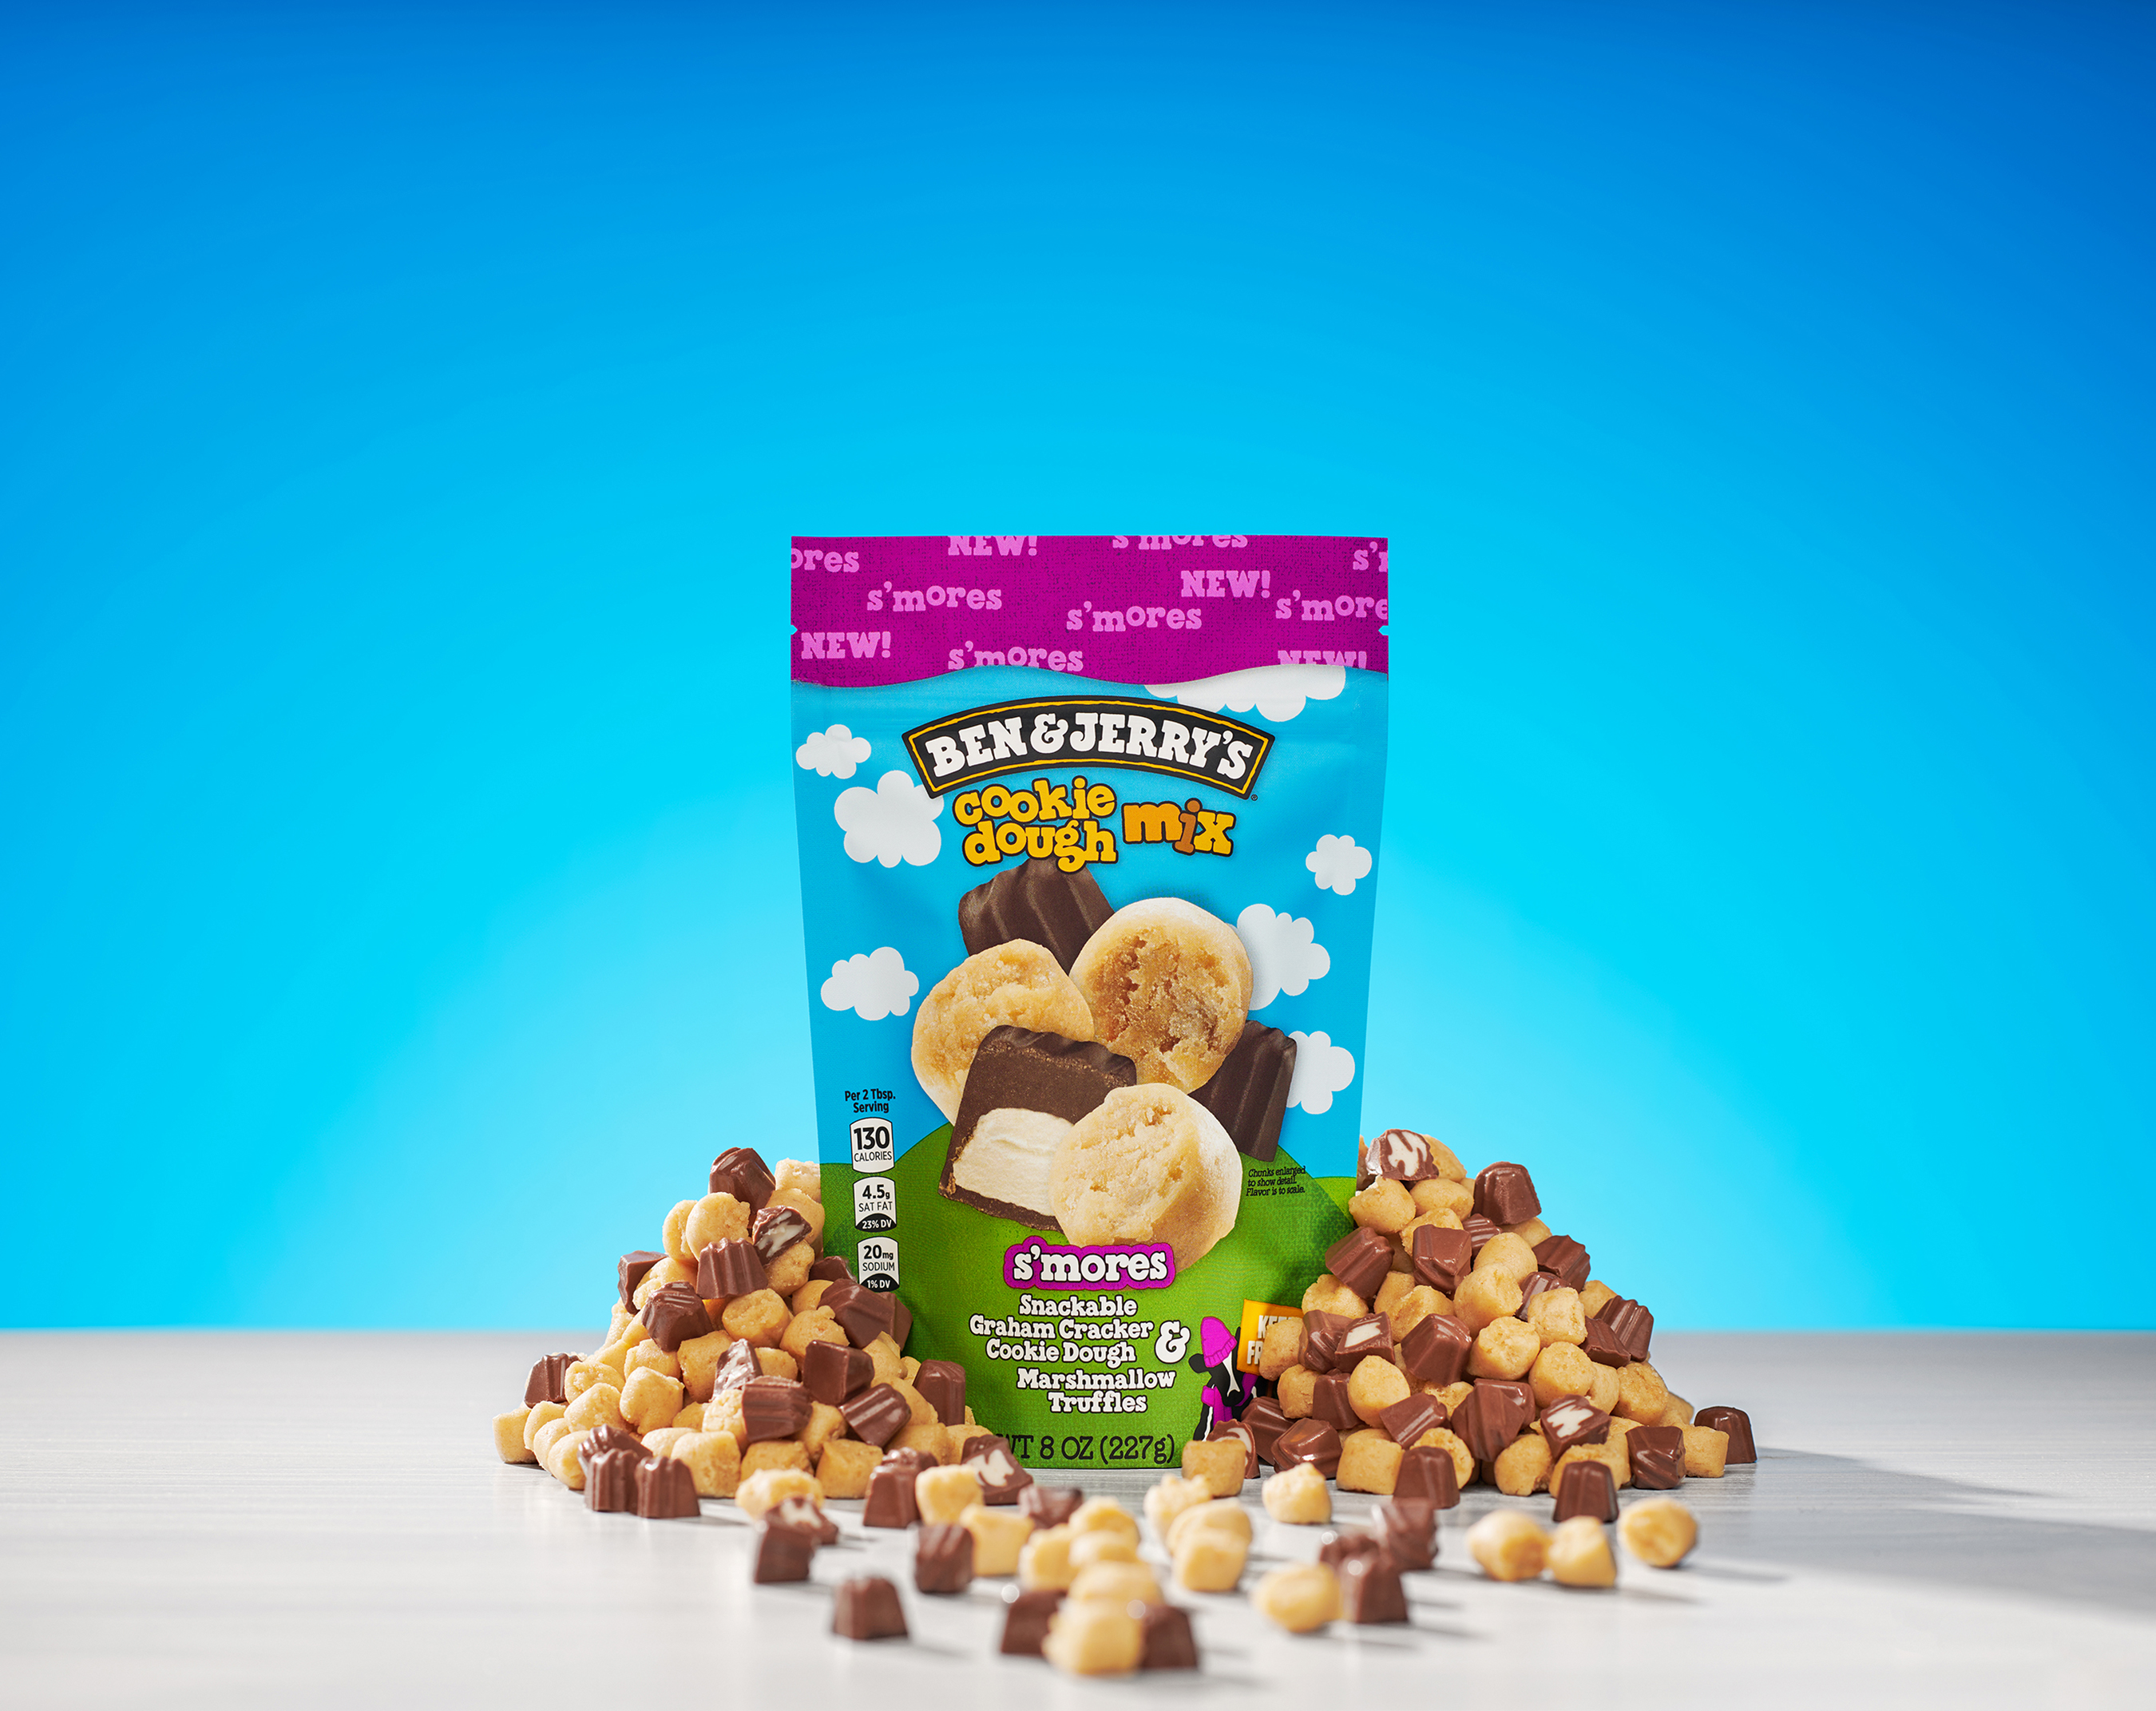 The new S’mores Cookie Dough Mix unveiled by Ben & Jerry’s features snackable graham cracker cookie dough with marshmallow truffles.